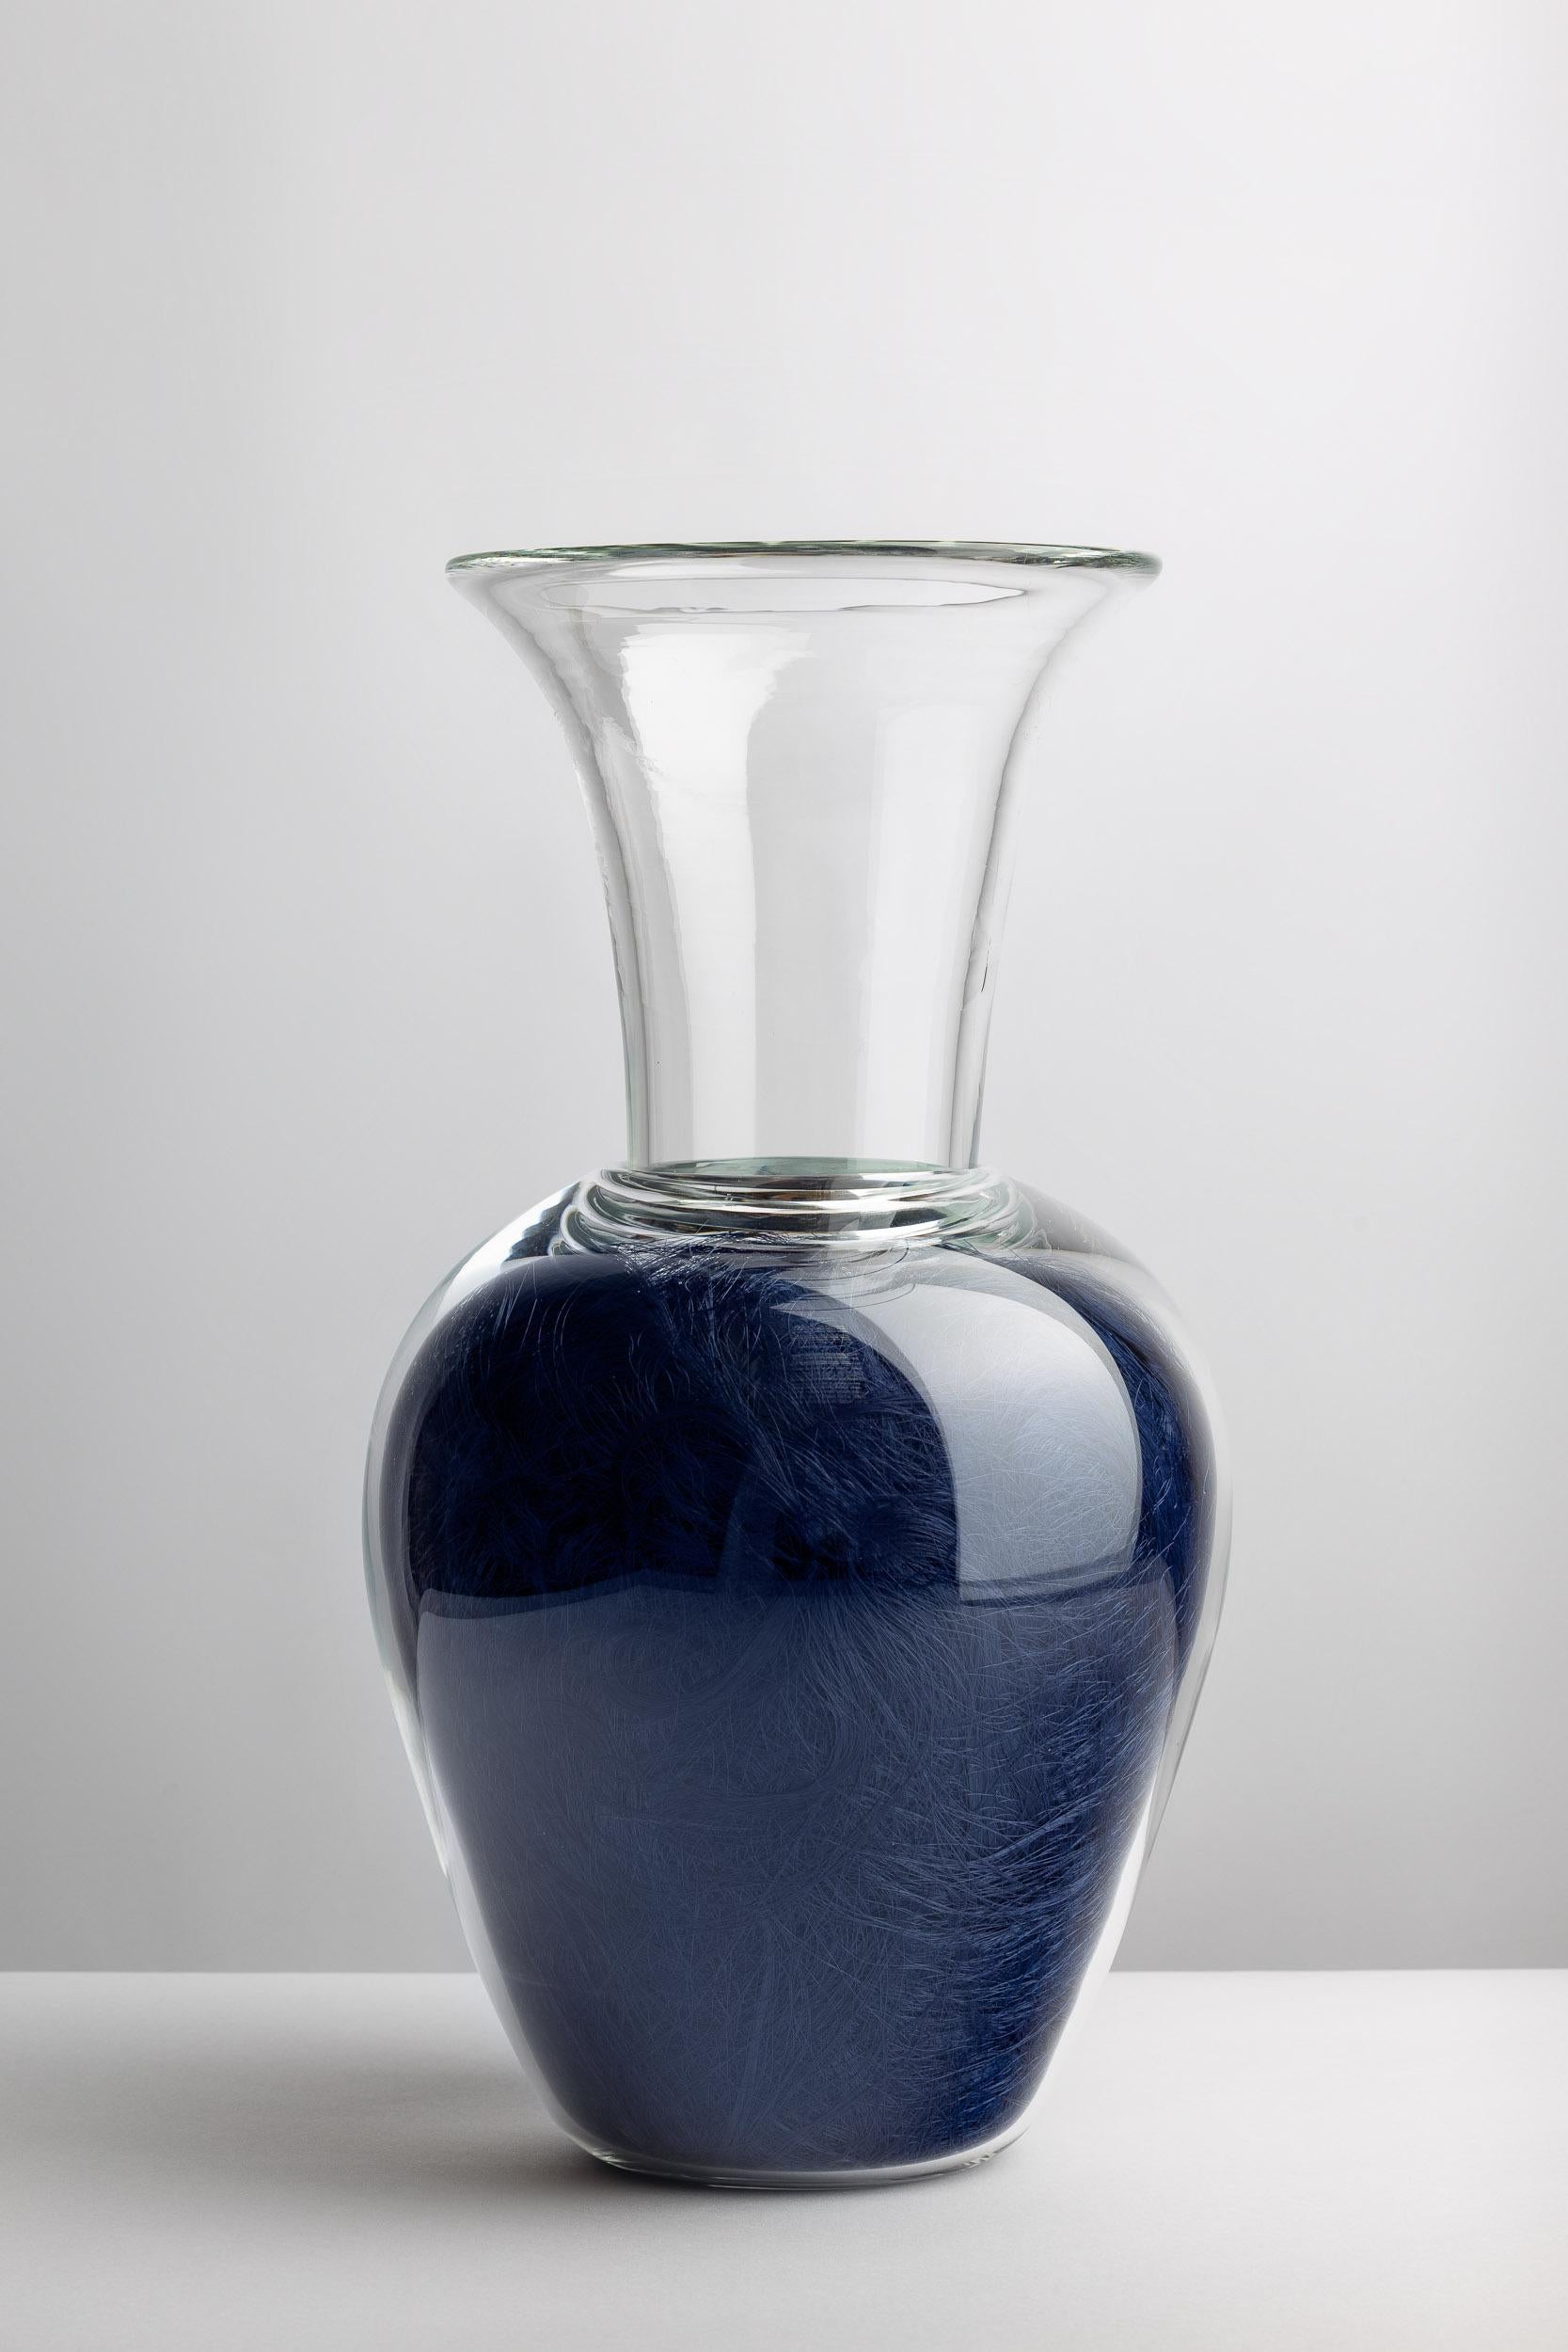 Blue might be the color of the sea, yet, if contaminated by pollutants it can change hue. VELENI’s Vase VA2-20eb serves the purpose of keeping plants and flowers alive, plants that however, are surrounded by sinuous microfibers that seem to mimic